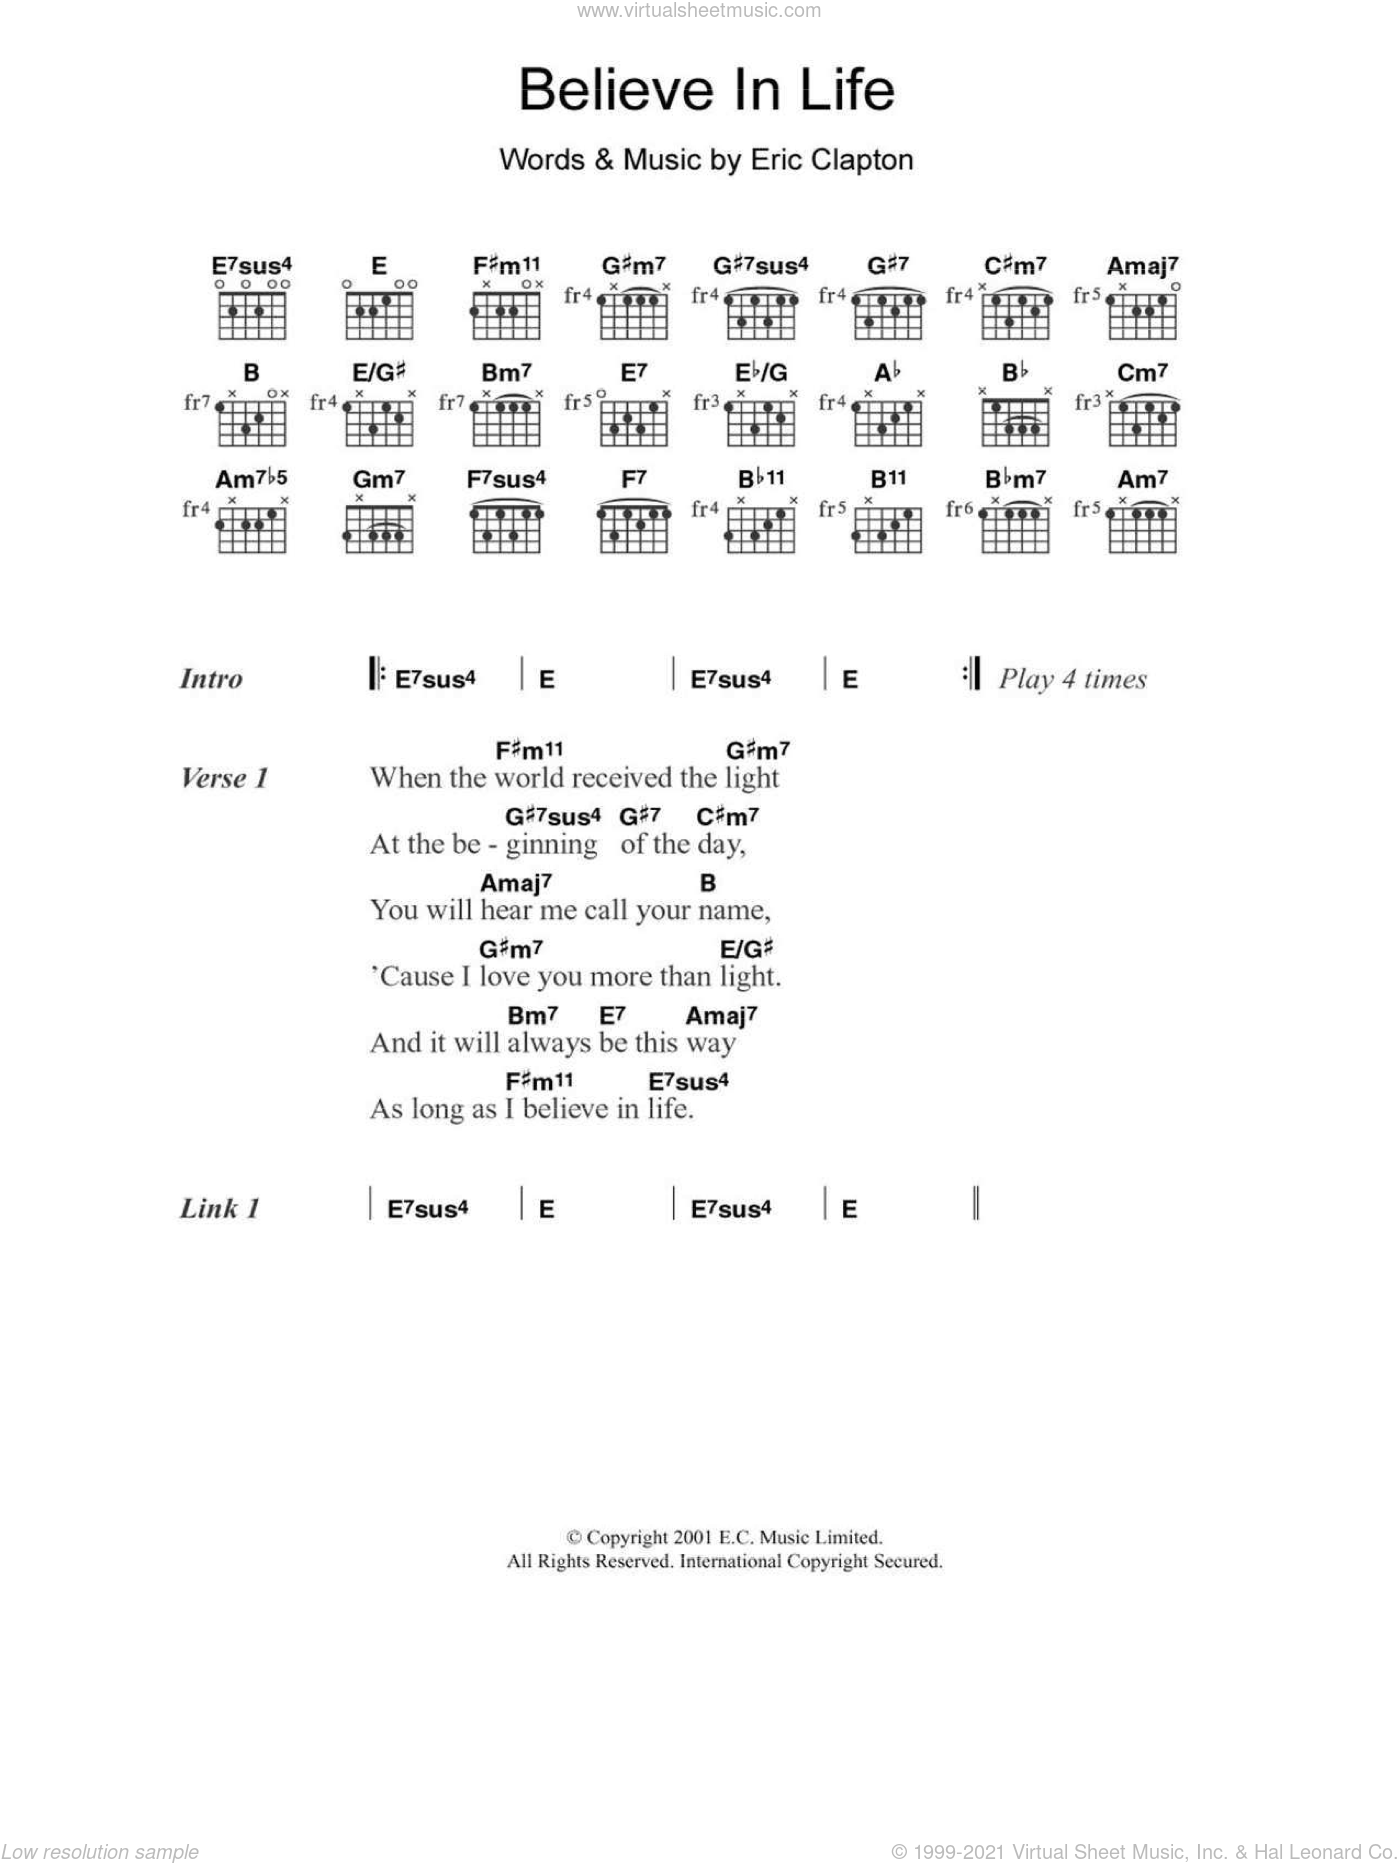 Clapton Believe In Life sheet music for guitar (chords) [PDF]